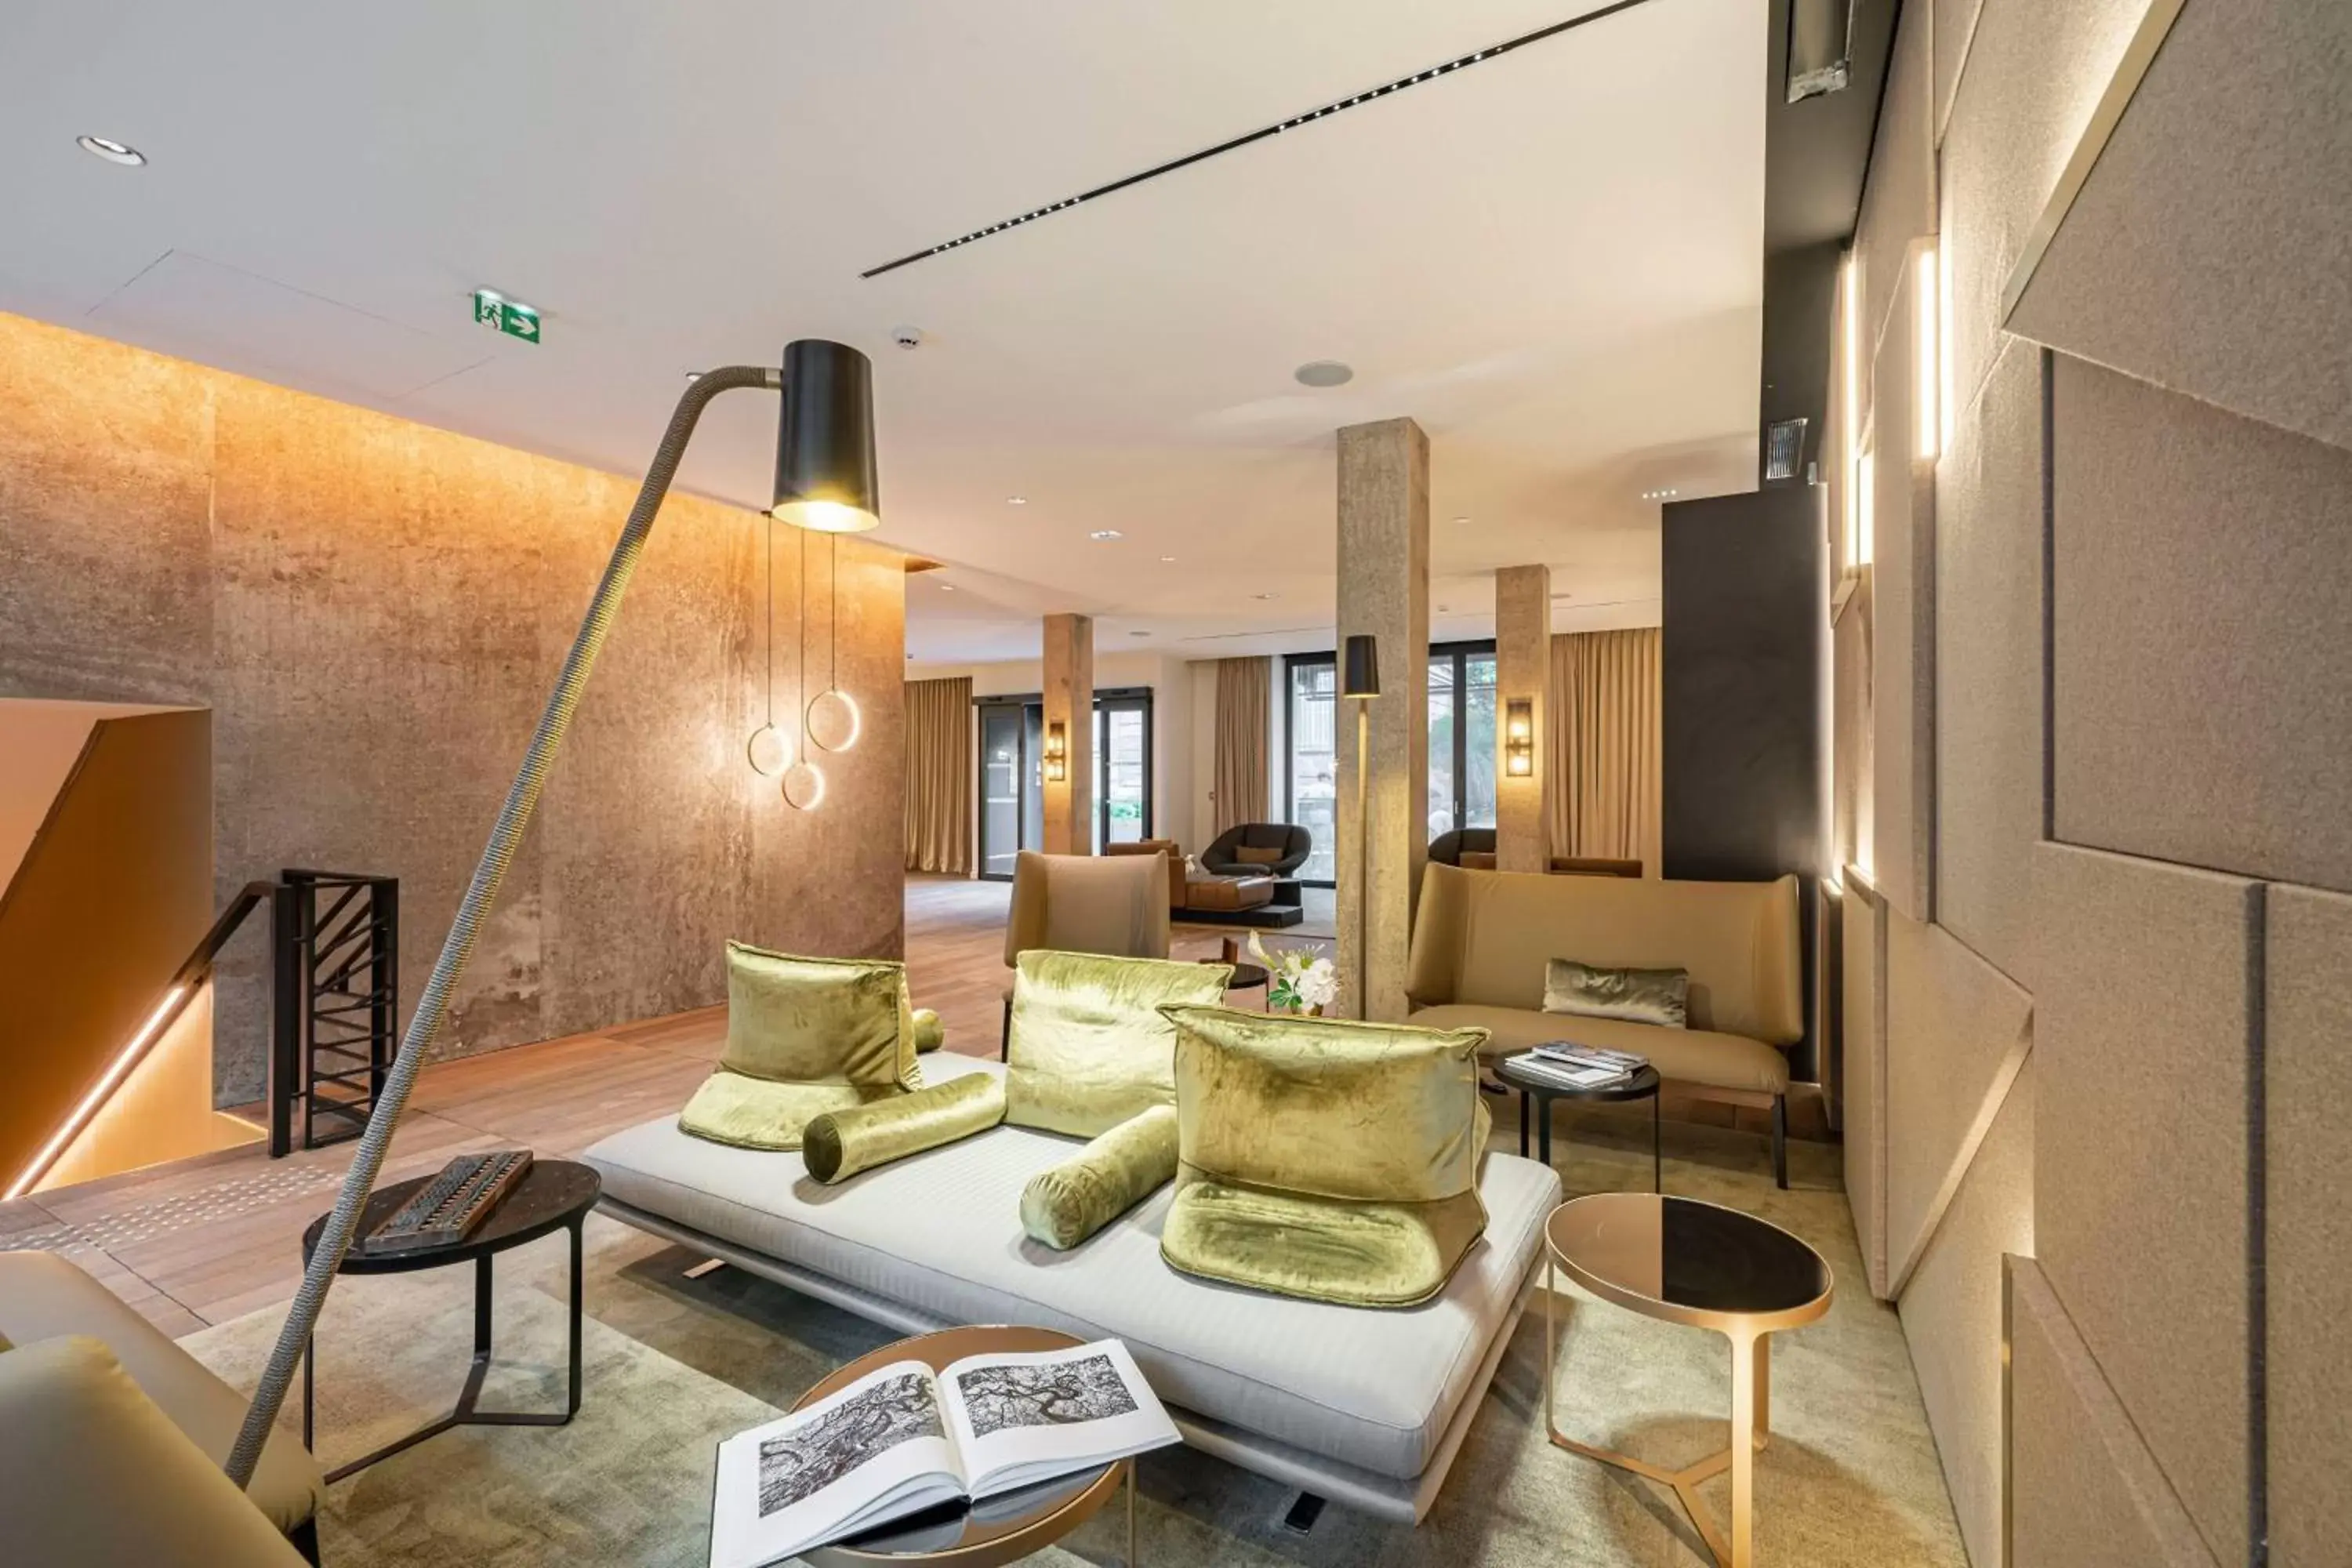 Lobby or reception in La Caserne Chanzy Hotel & Spa, Autograph Collection